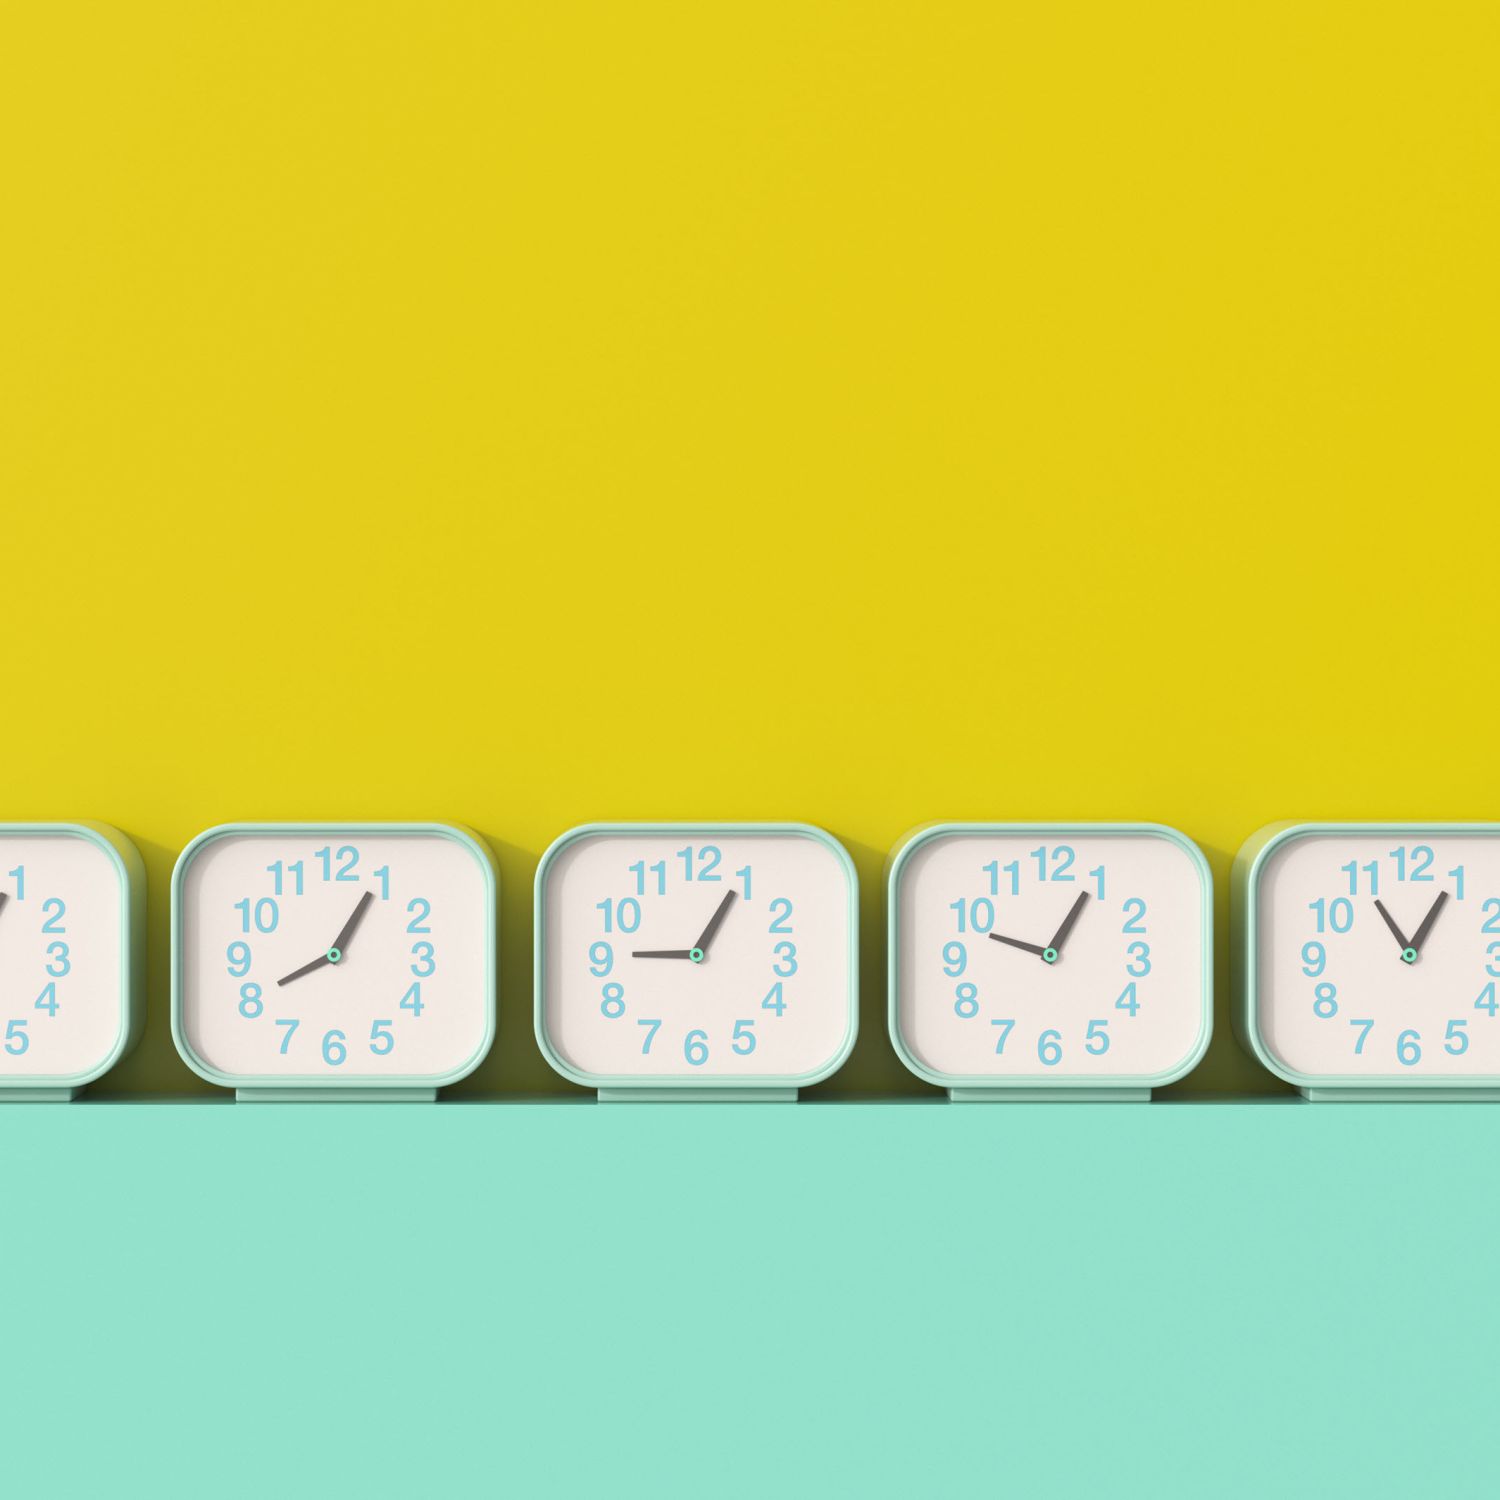 A bunch of matching clocks showing different times.